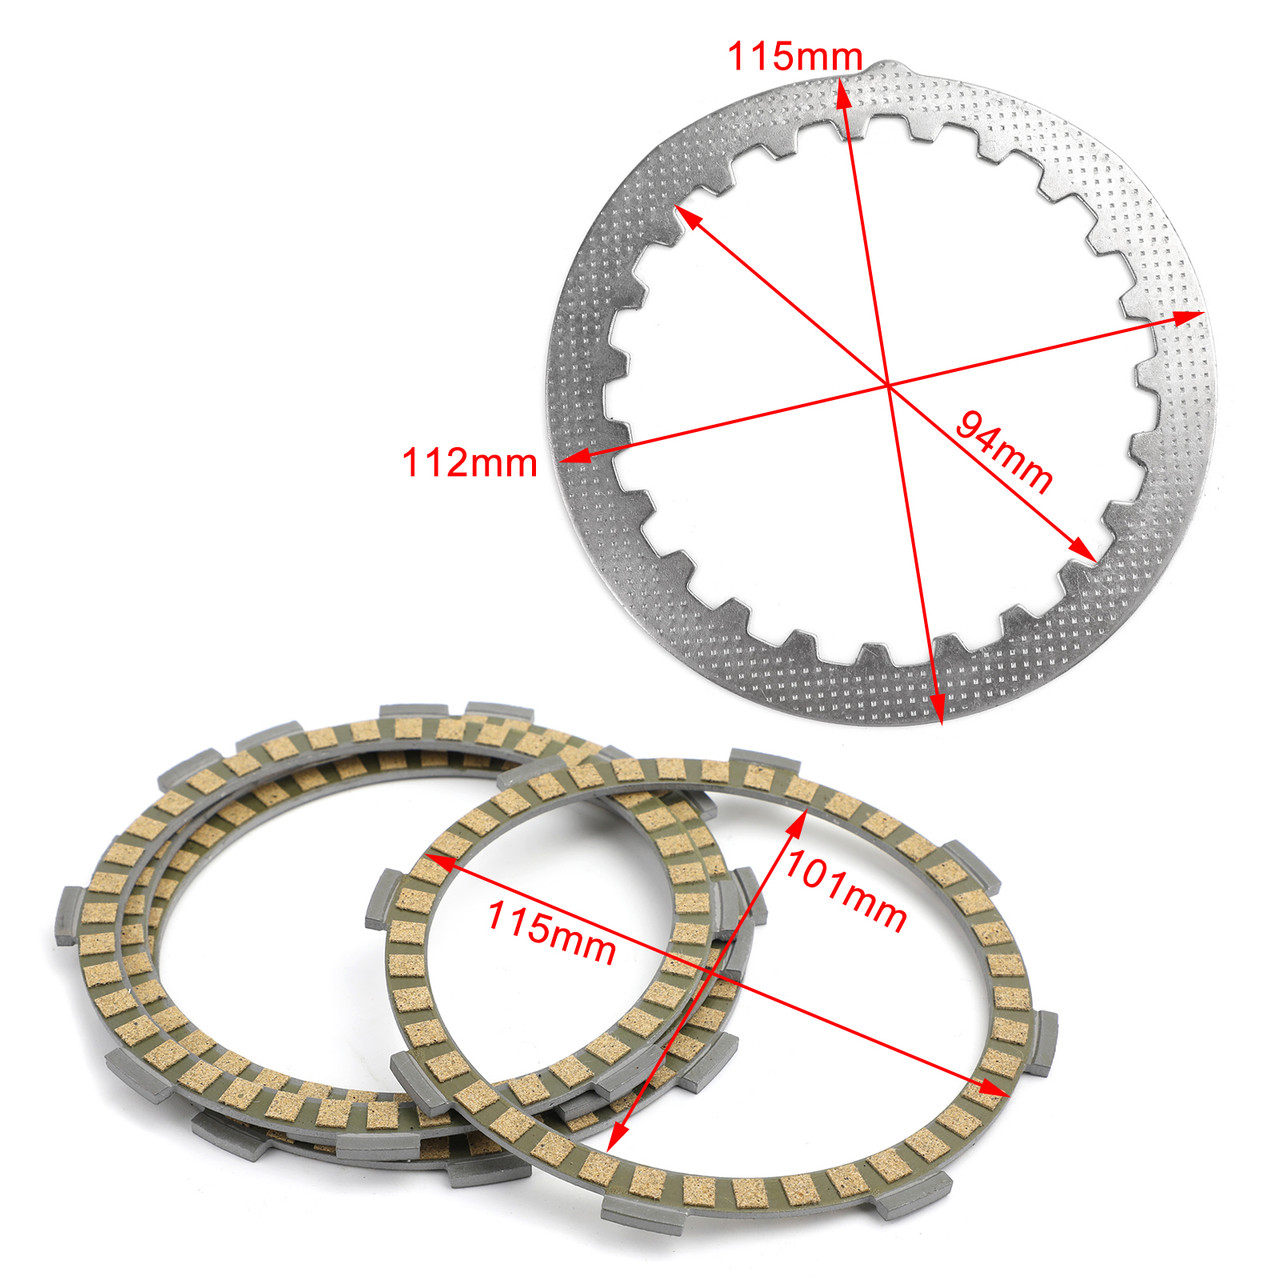 Clutch Plate Kit Fit For Yamaha DT50R DT50 4AD 92 DT80LC DT80 53W 86 YZ80C 76 DT80 MX(Type 36N) 83-85 RD75LC 91 TZM50R 97